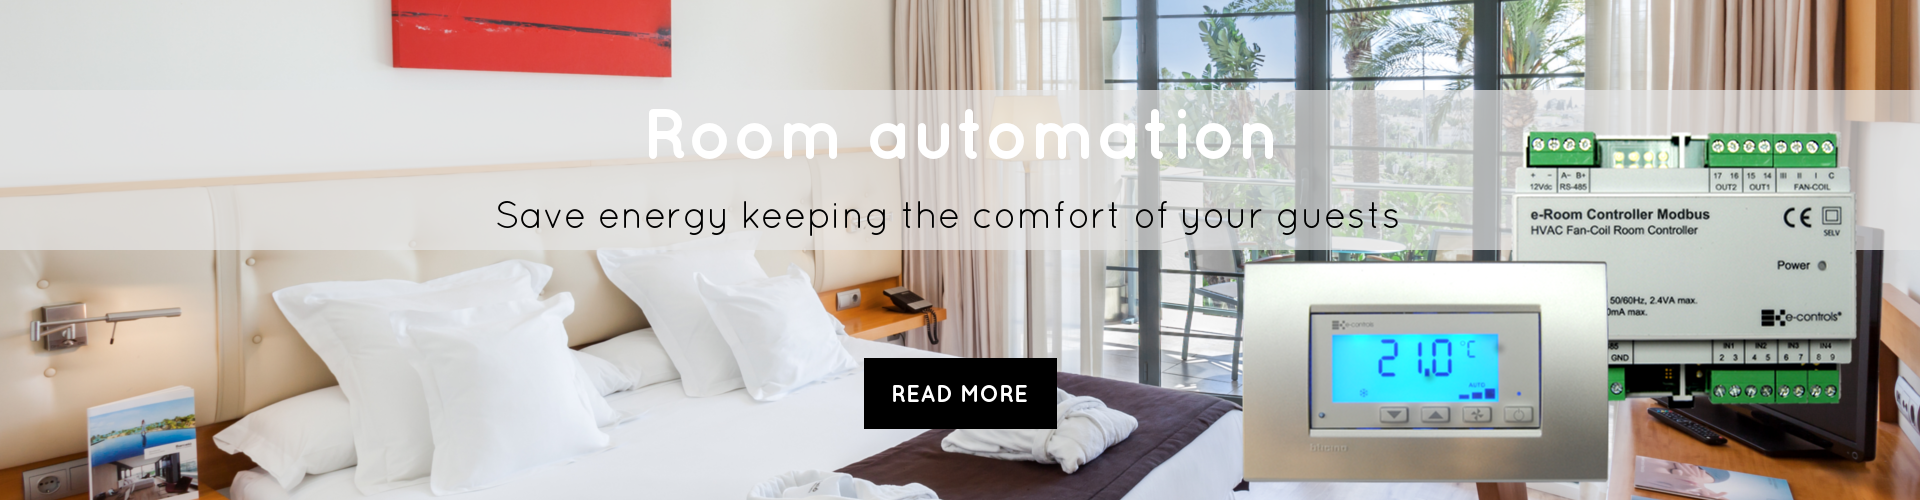 Room automation save energy keeping the comfort of your guests